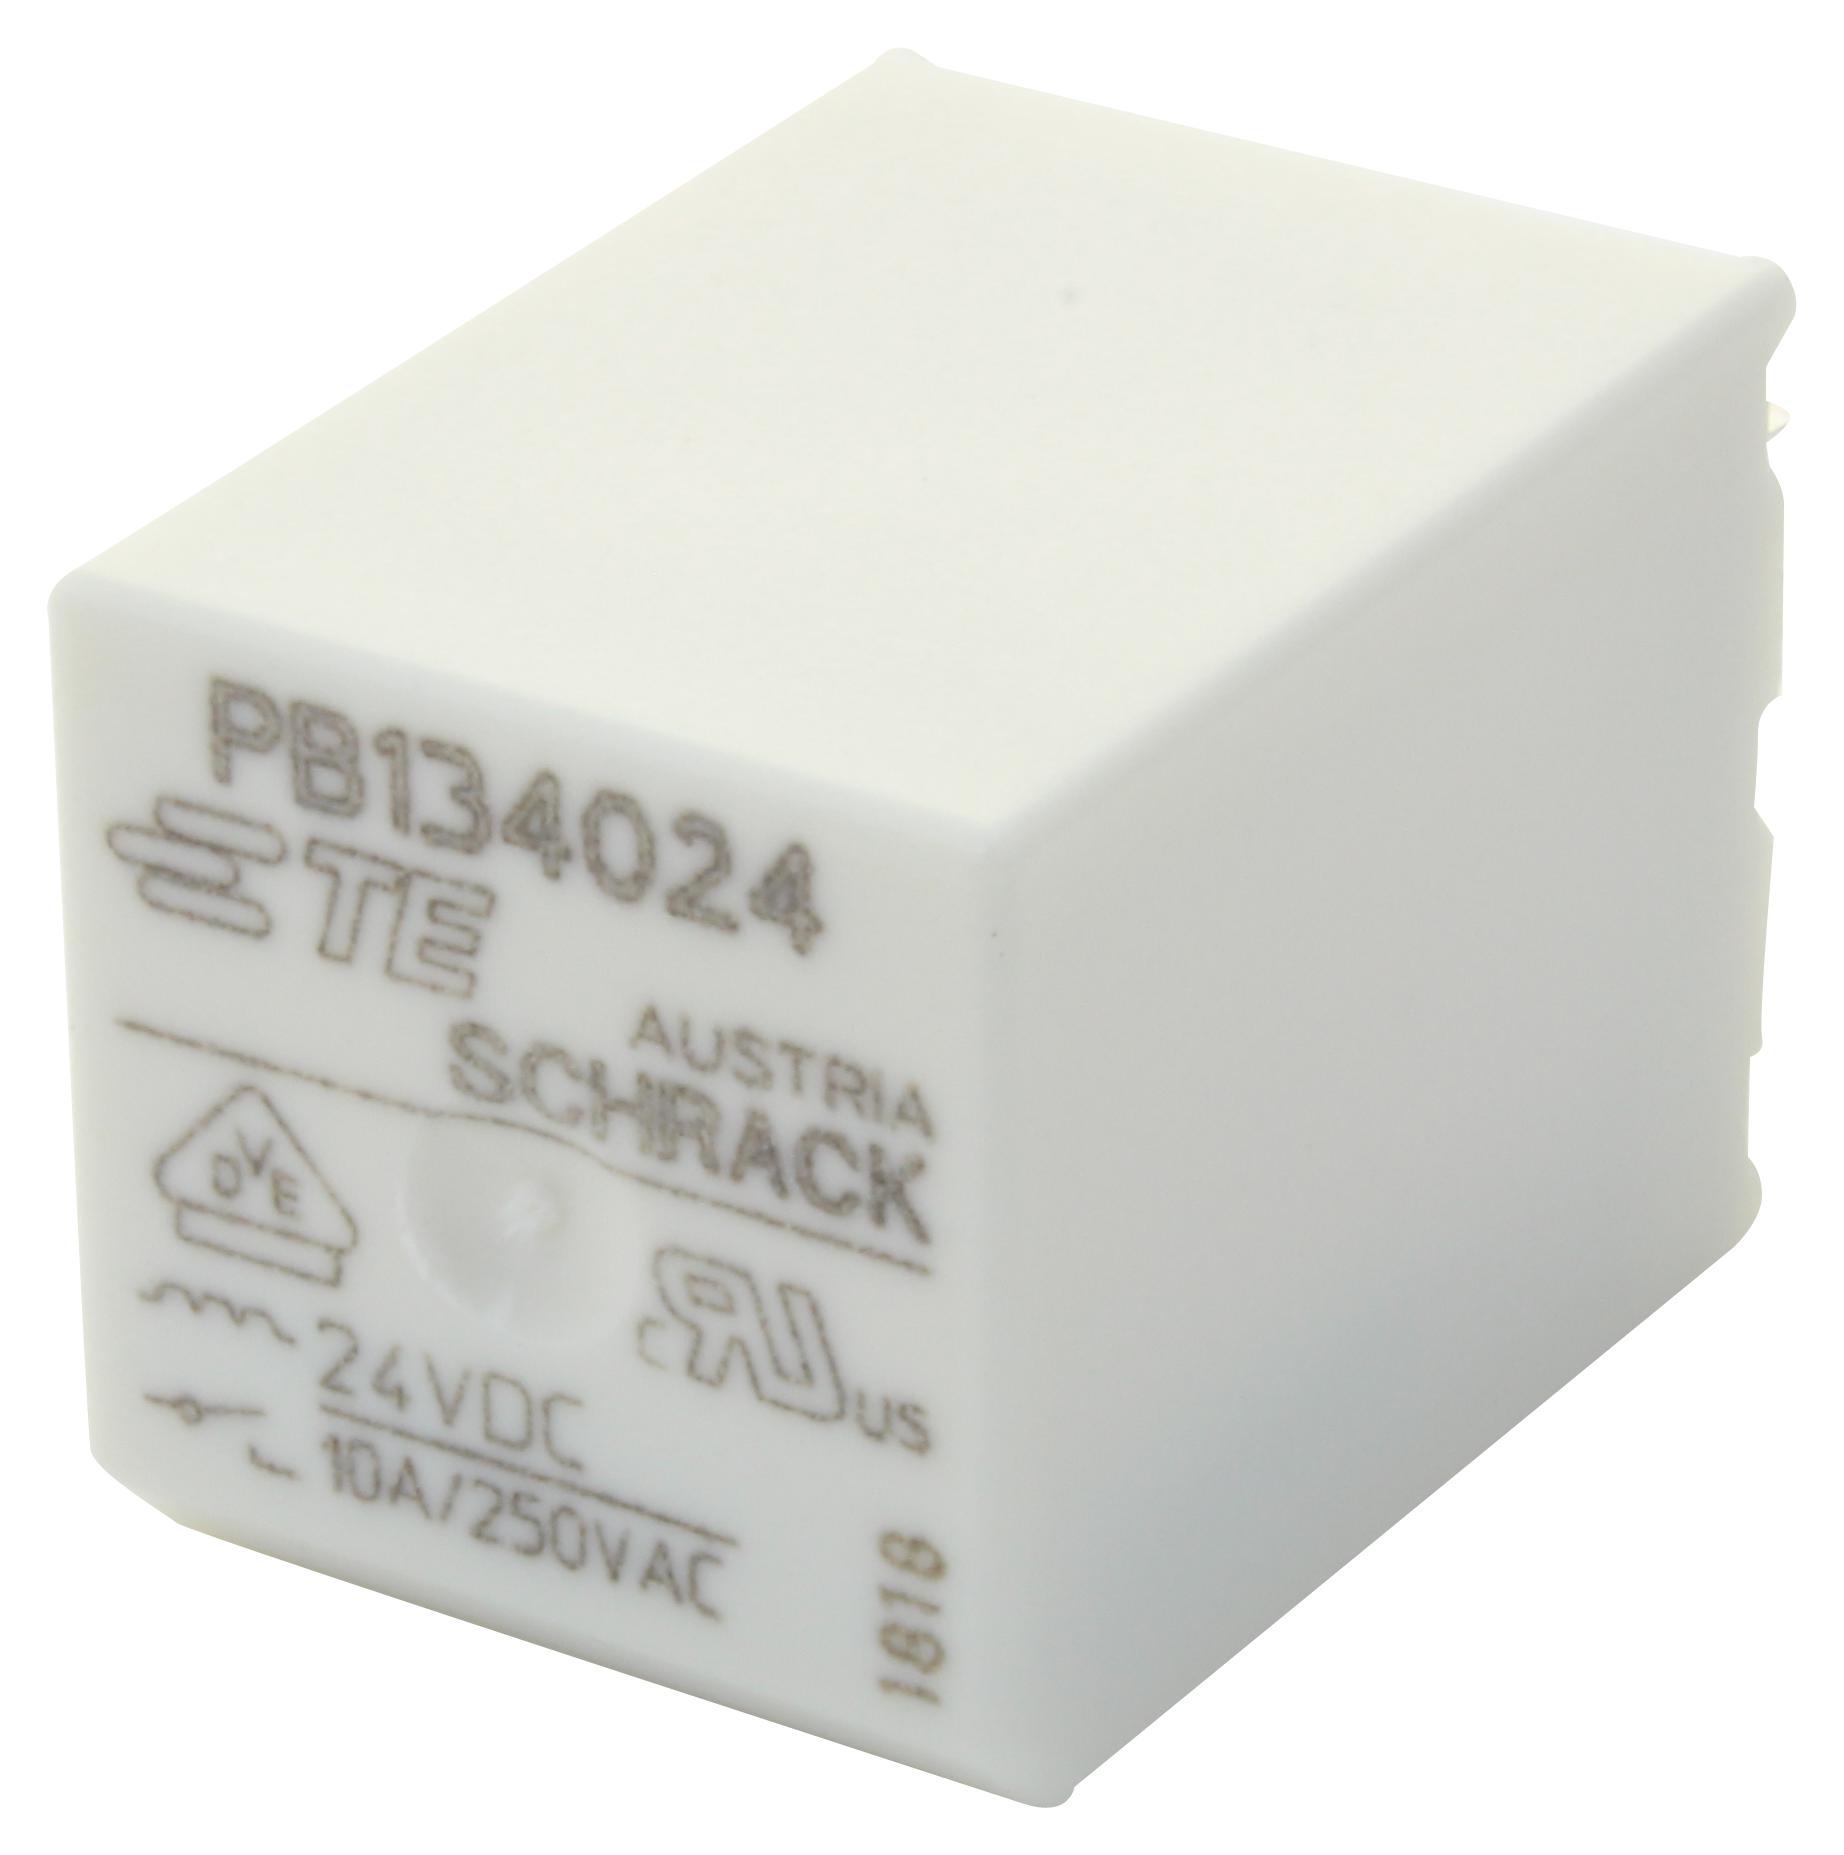 PB134024 POWER RELAY, SPST-NO, 10A, 250VAC, TH SCHRACK - TE CONNECTIVITY